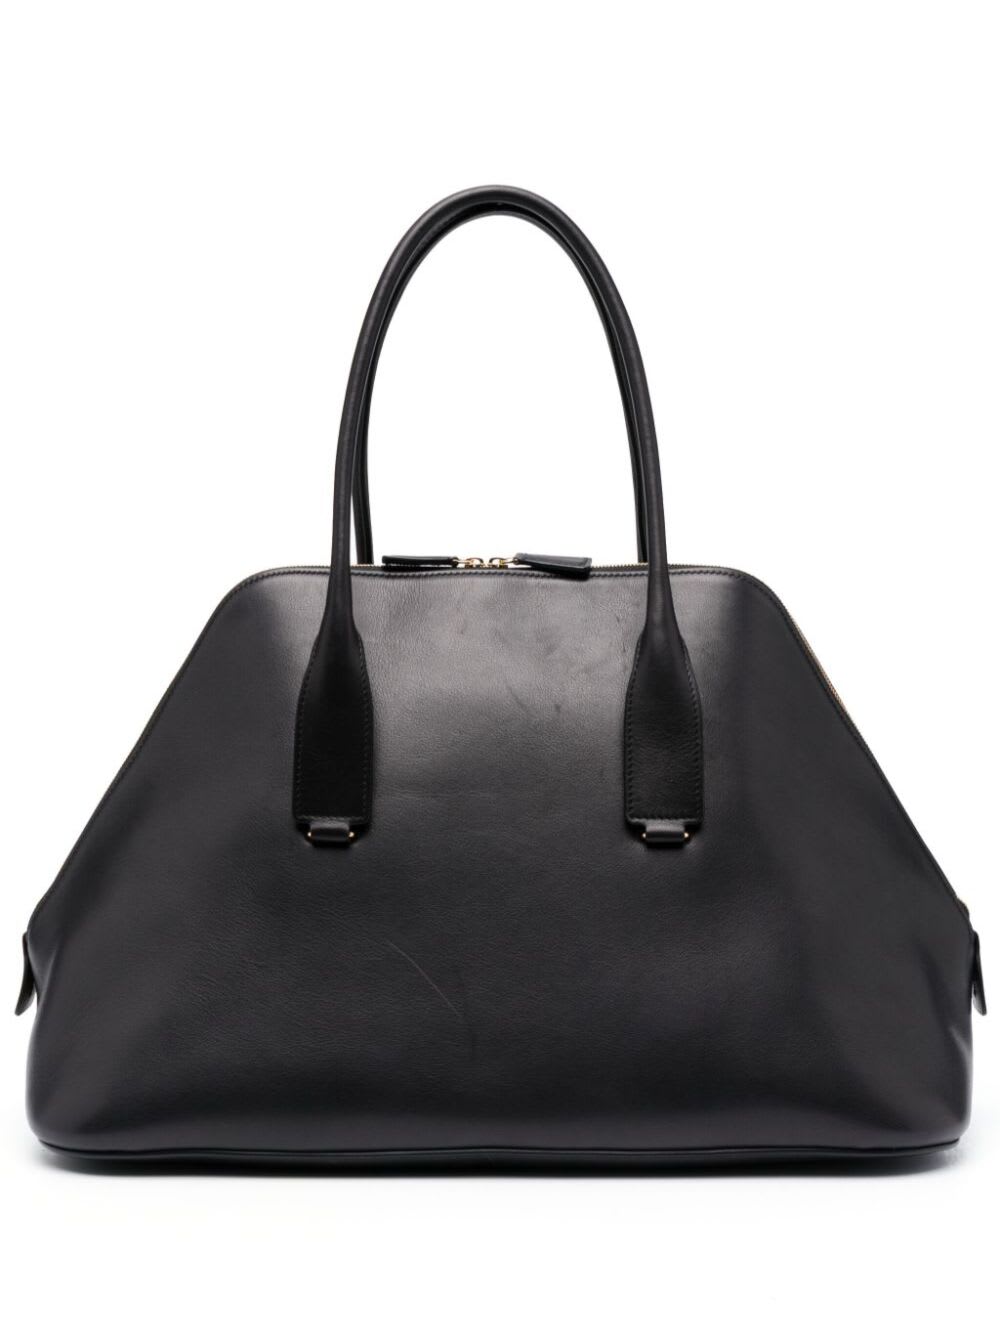 THE ROW DEVON BLACK HANDBAG WITH ZIP FASTENING IN SMOOTH LEATHER WOMAN